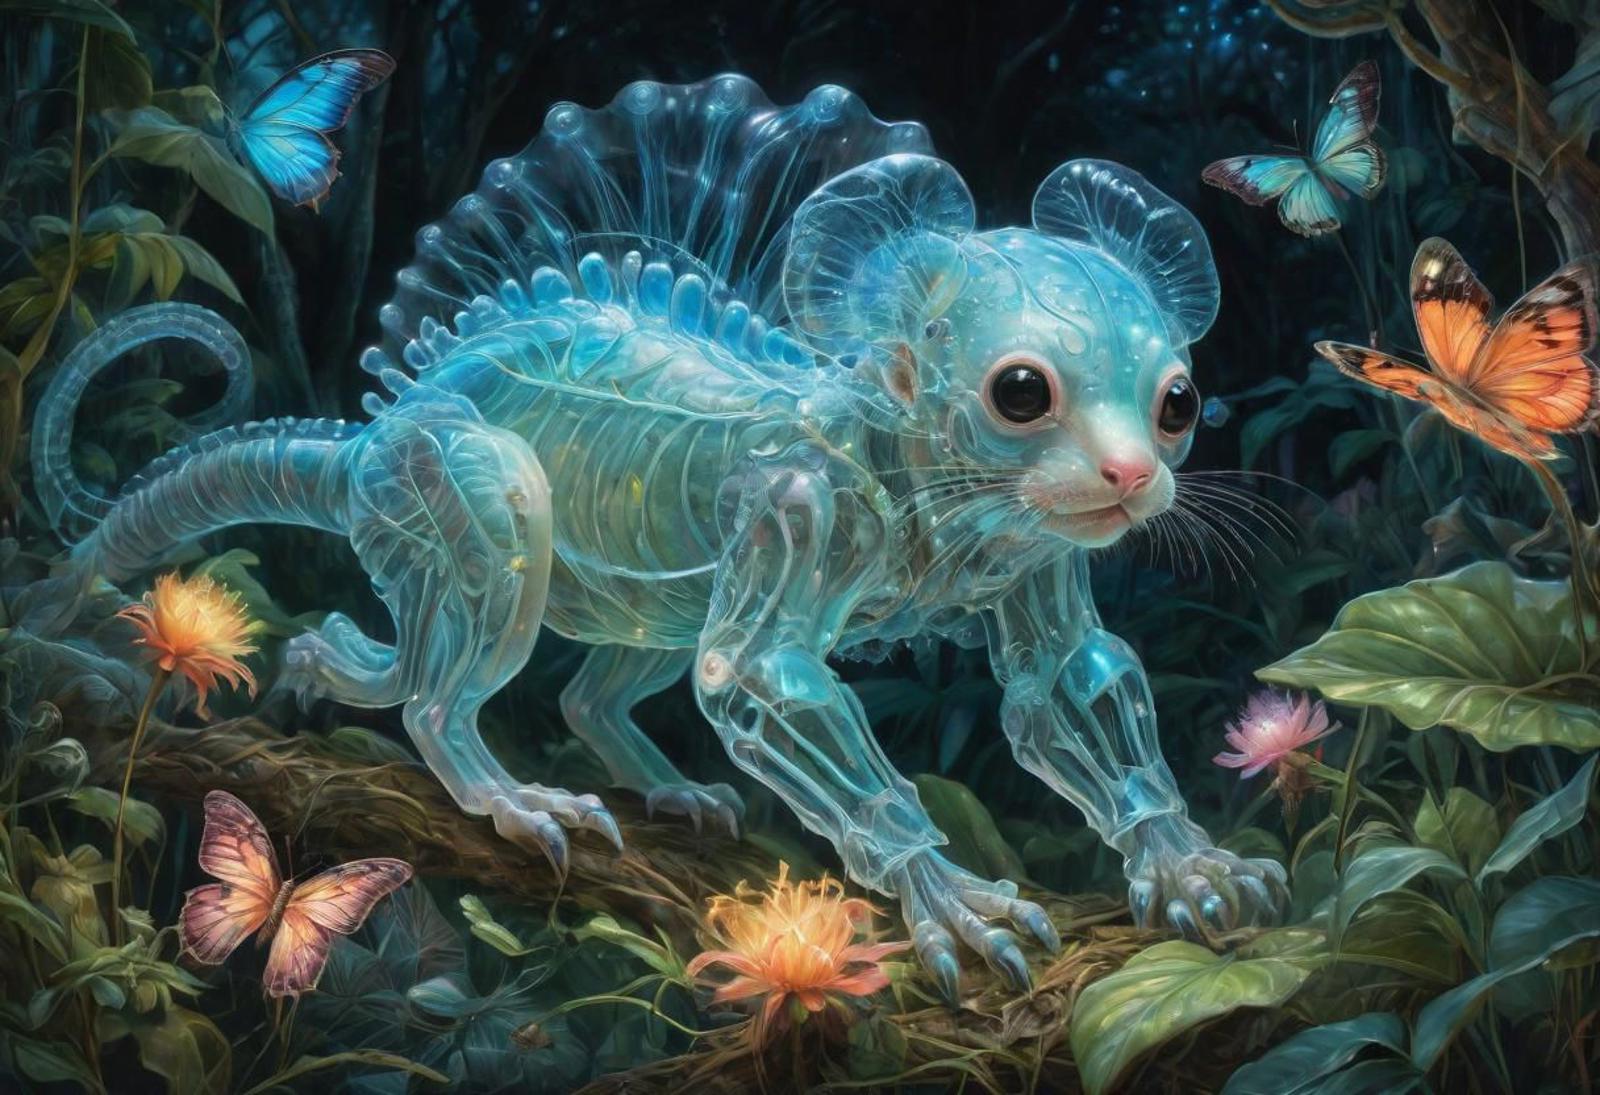 A blue, translucent, glow-in-the-dark kitty cat with butterfly wings and a flower in its mouth, surrounded by butterflies.